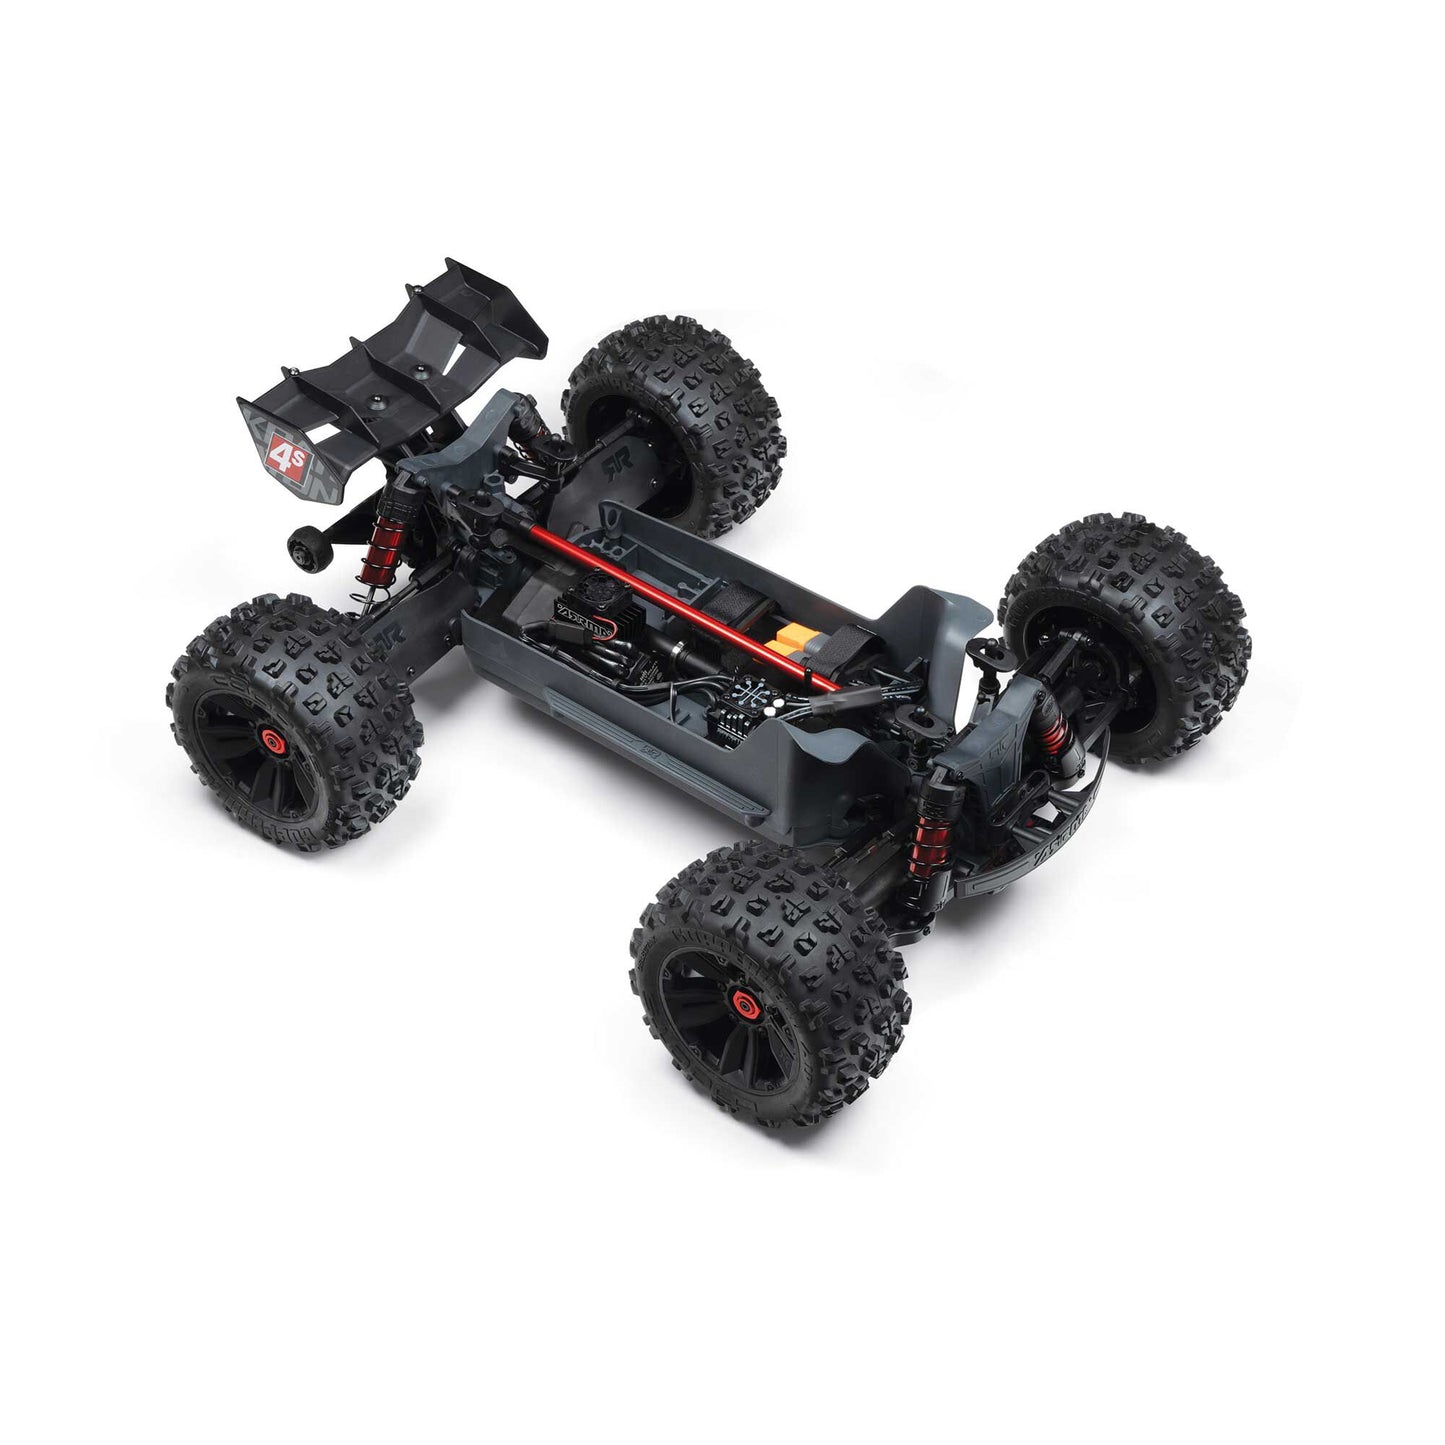 Kraton 4X4 4S BL 1/10TH 4WD Speed MT (RED)